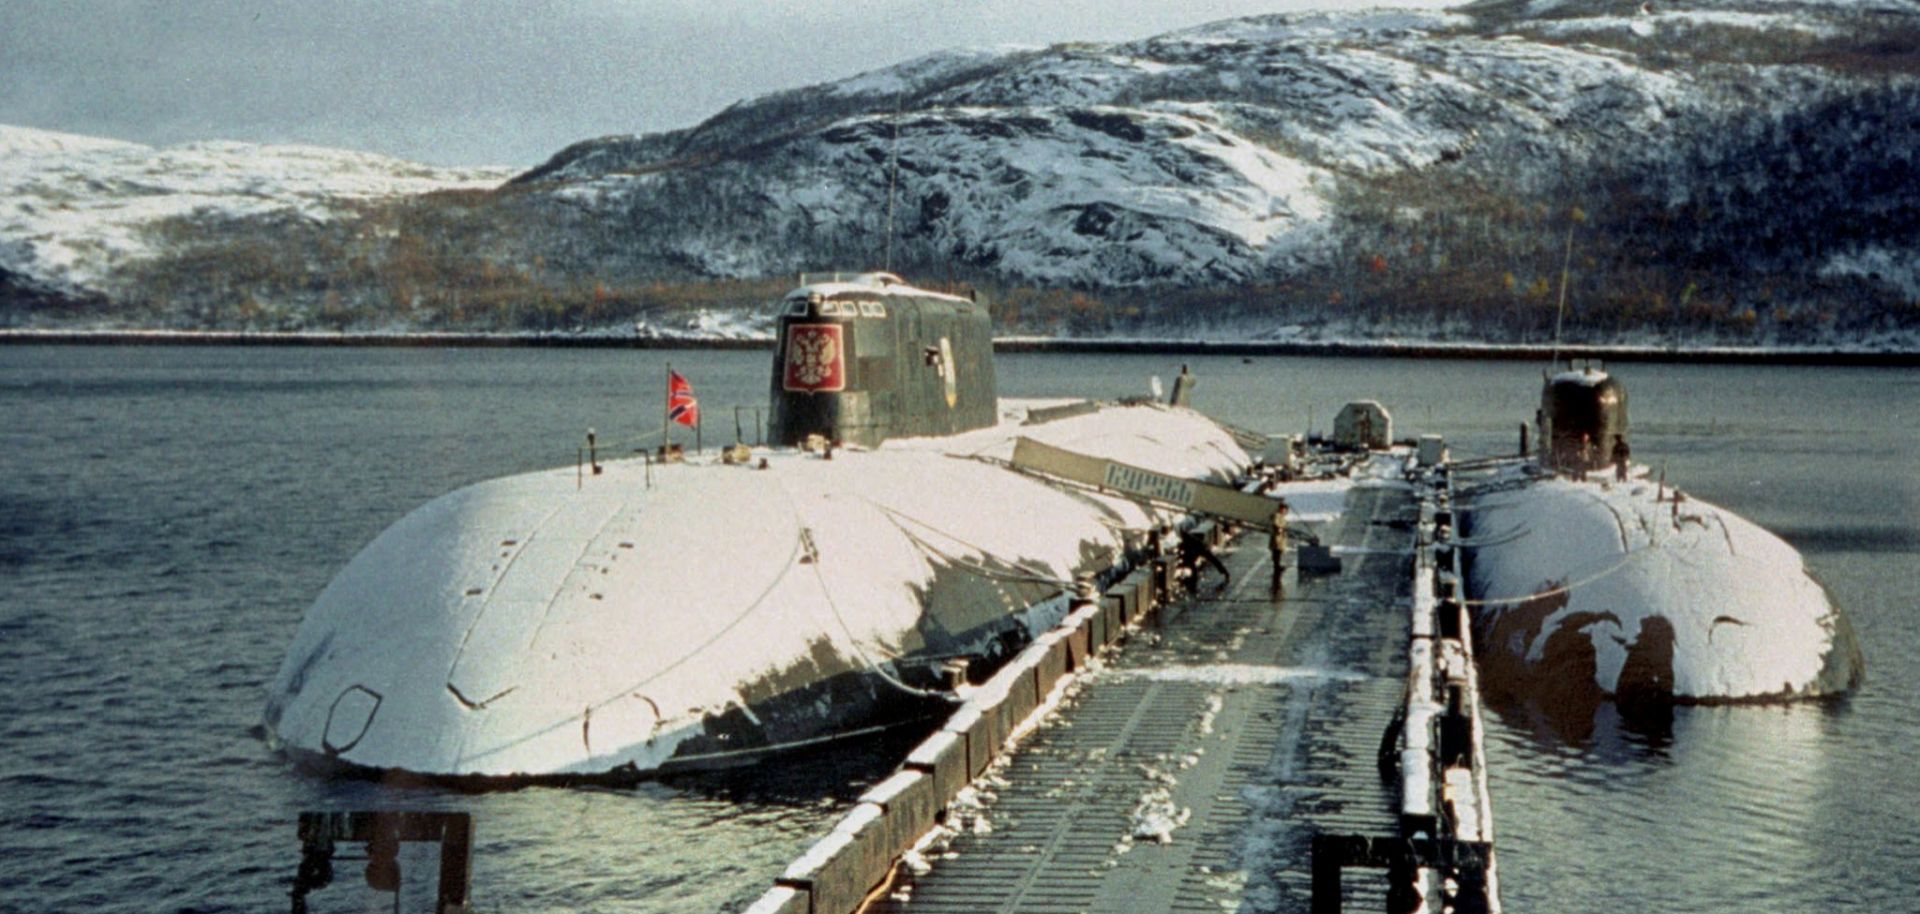 The ill-fated Kursk submarine (L) sits in port in the winter of 2000.